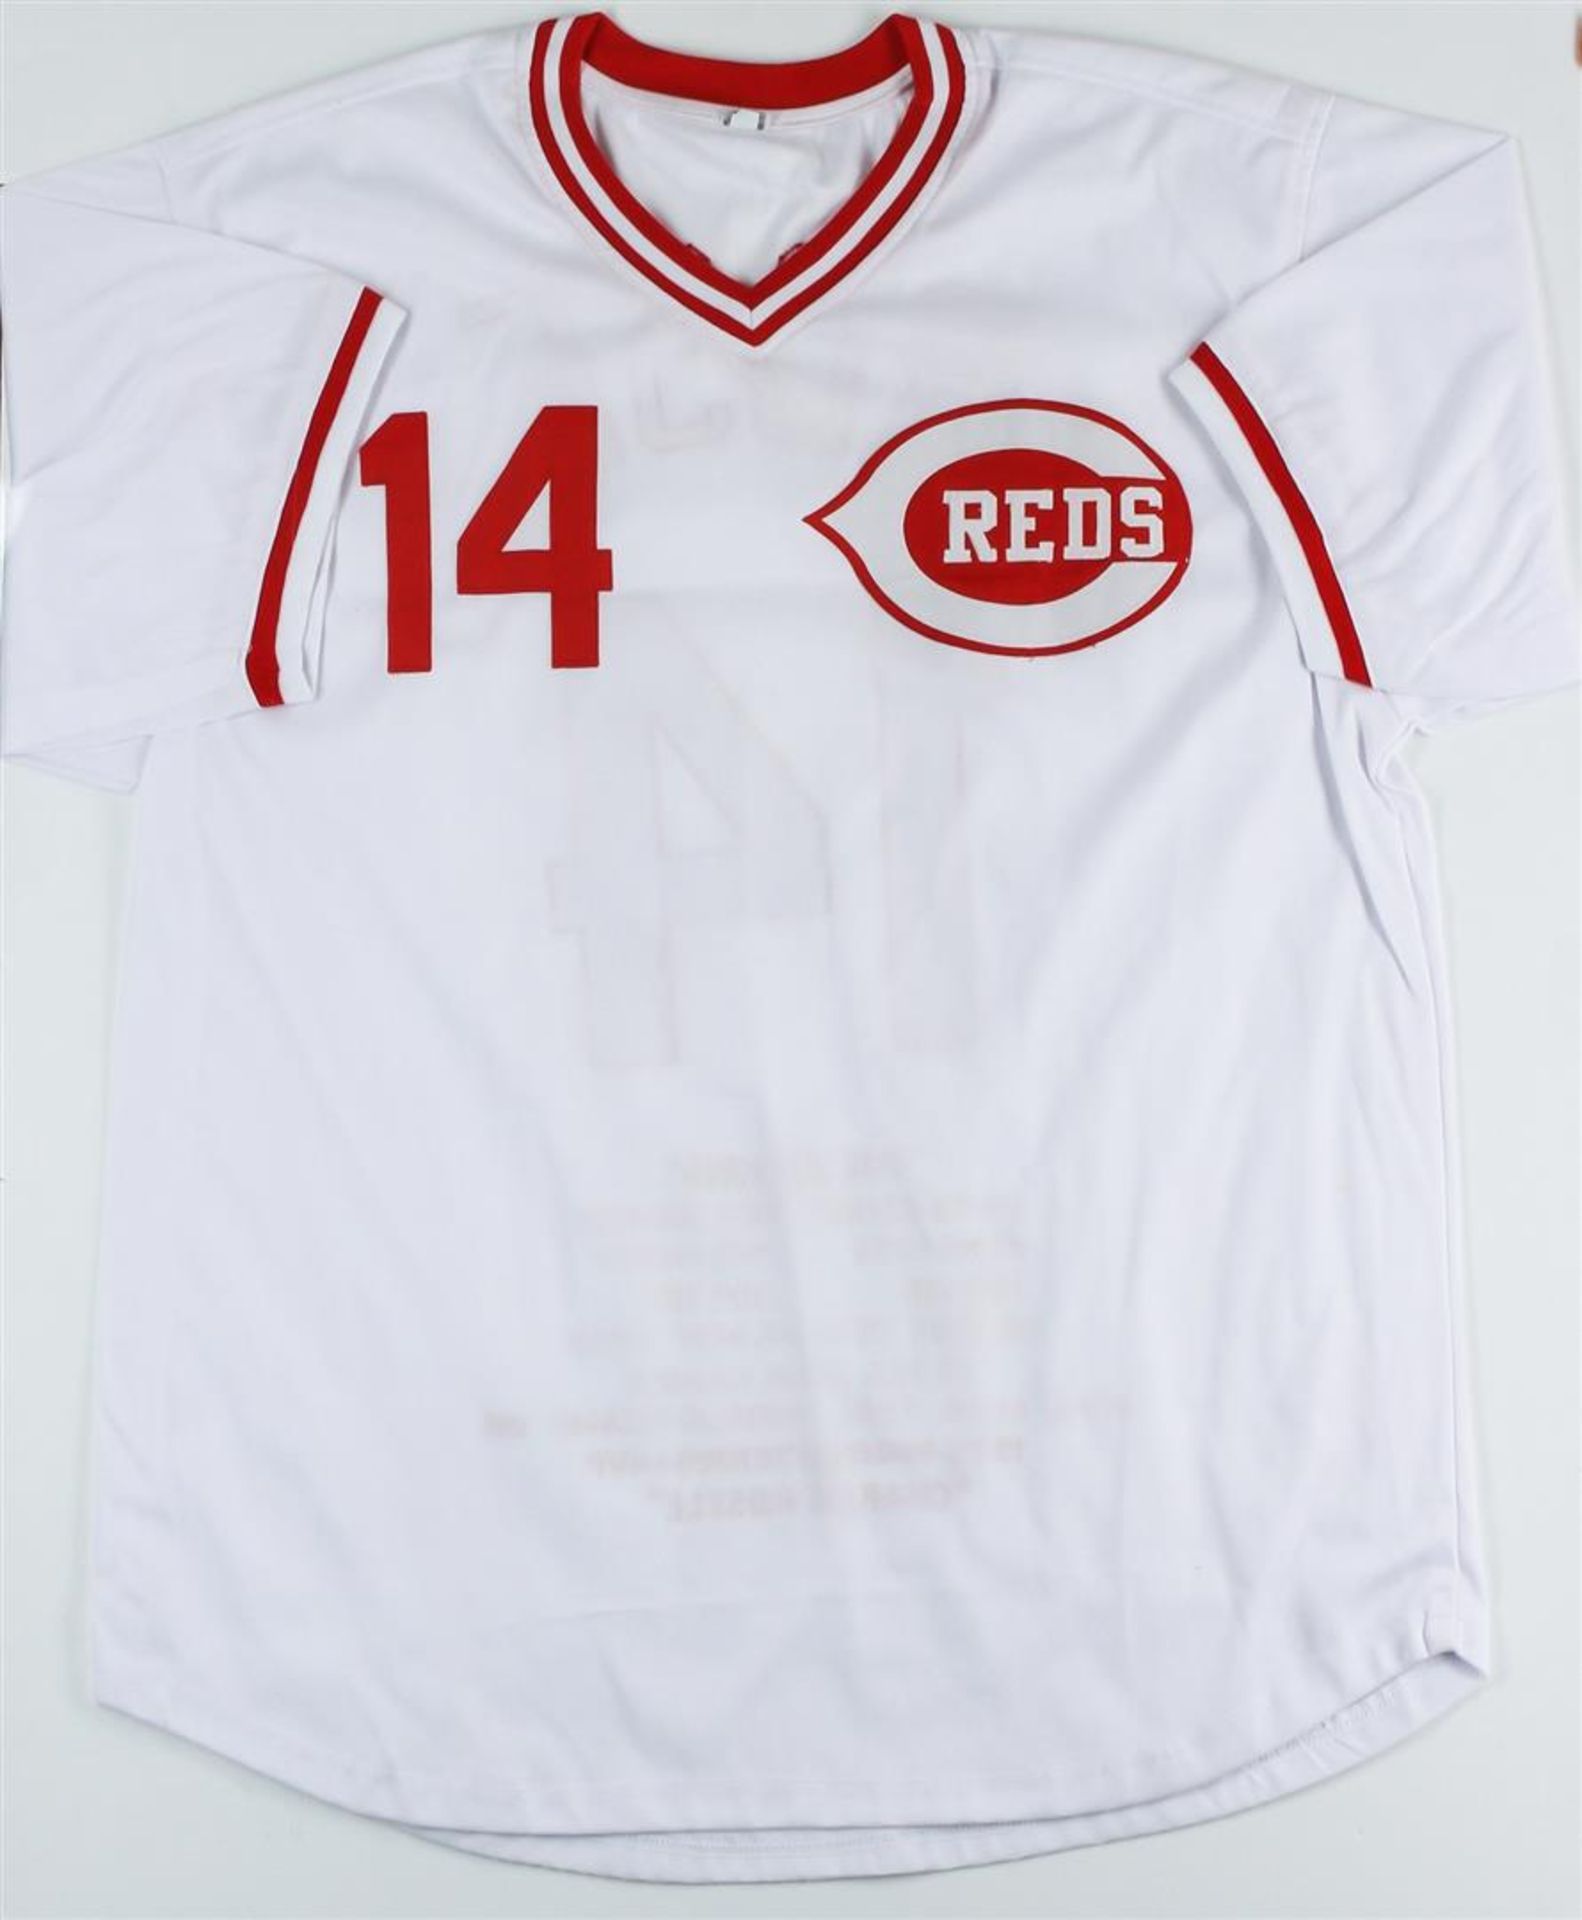 Cincinnati Reds Pete Rose Autographed Jersey With Stats - Image 3 of 3